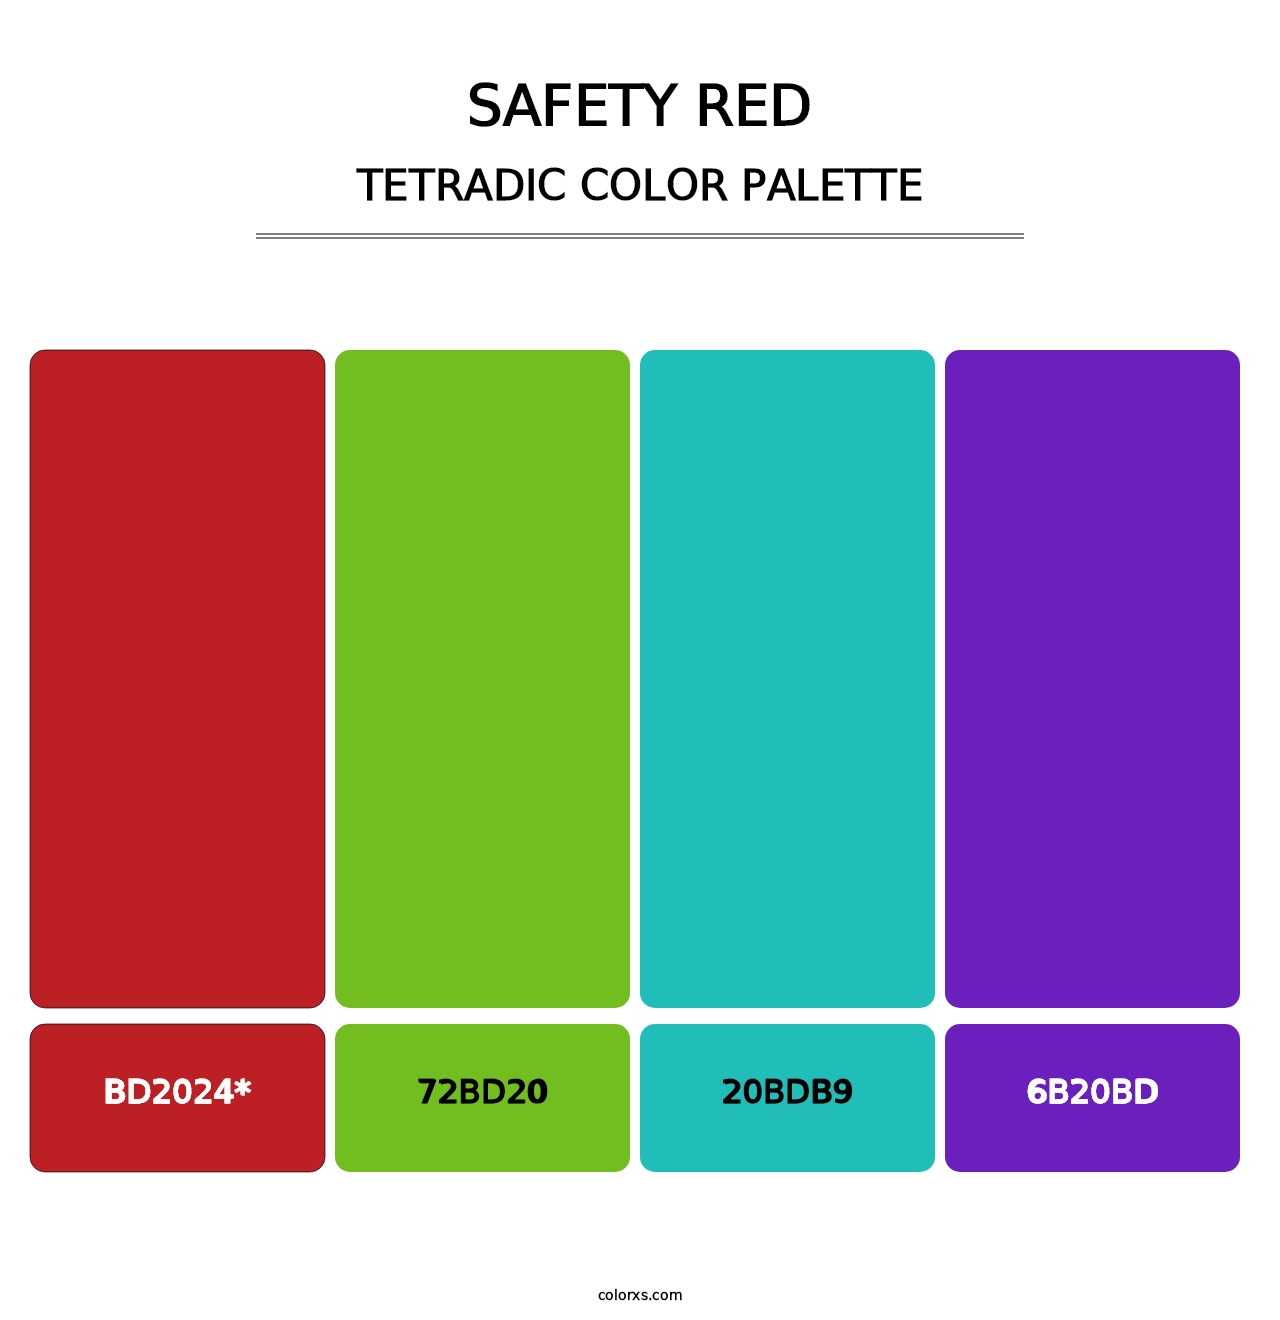 Safety Red - Tetradic Color Palette